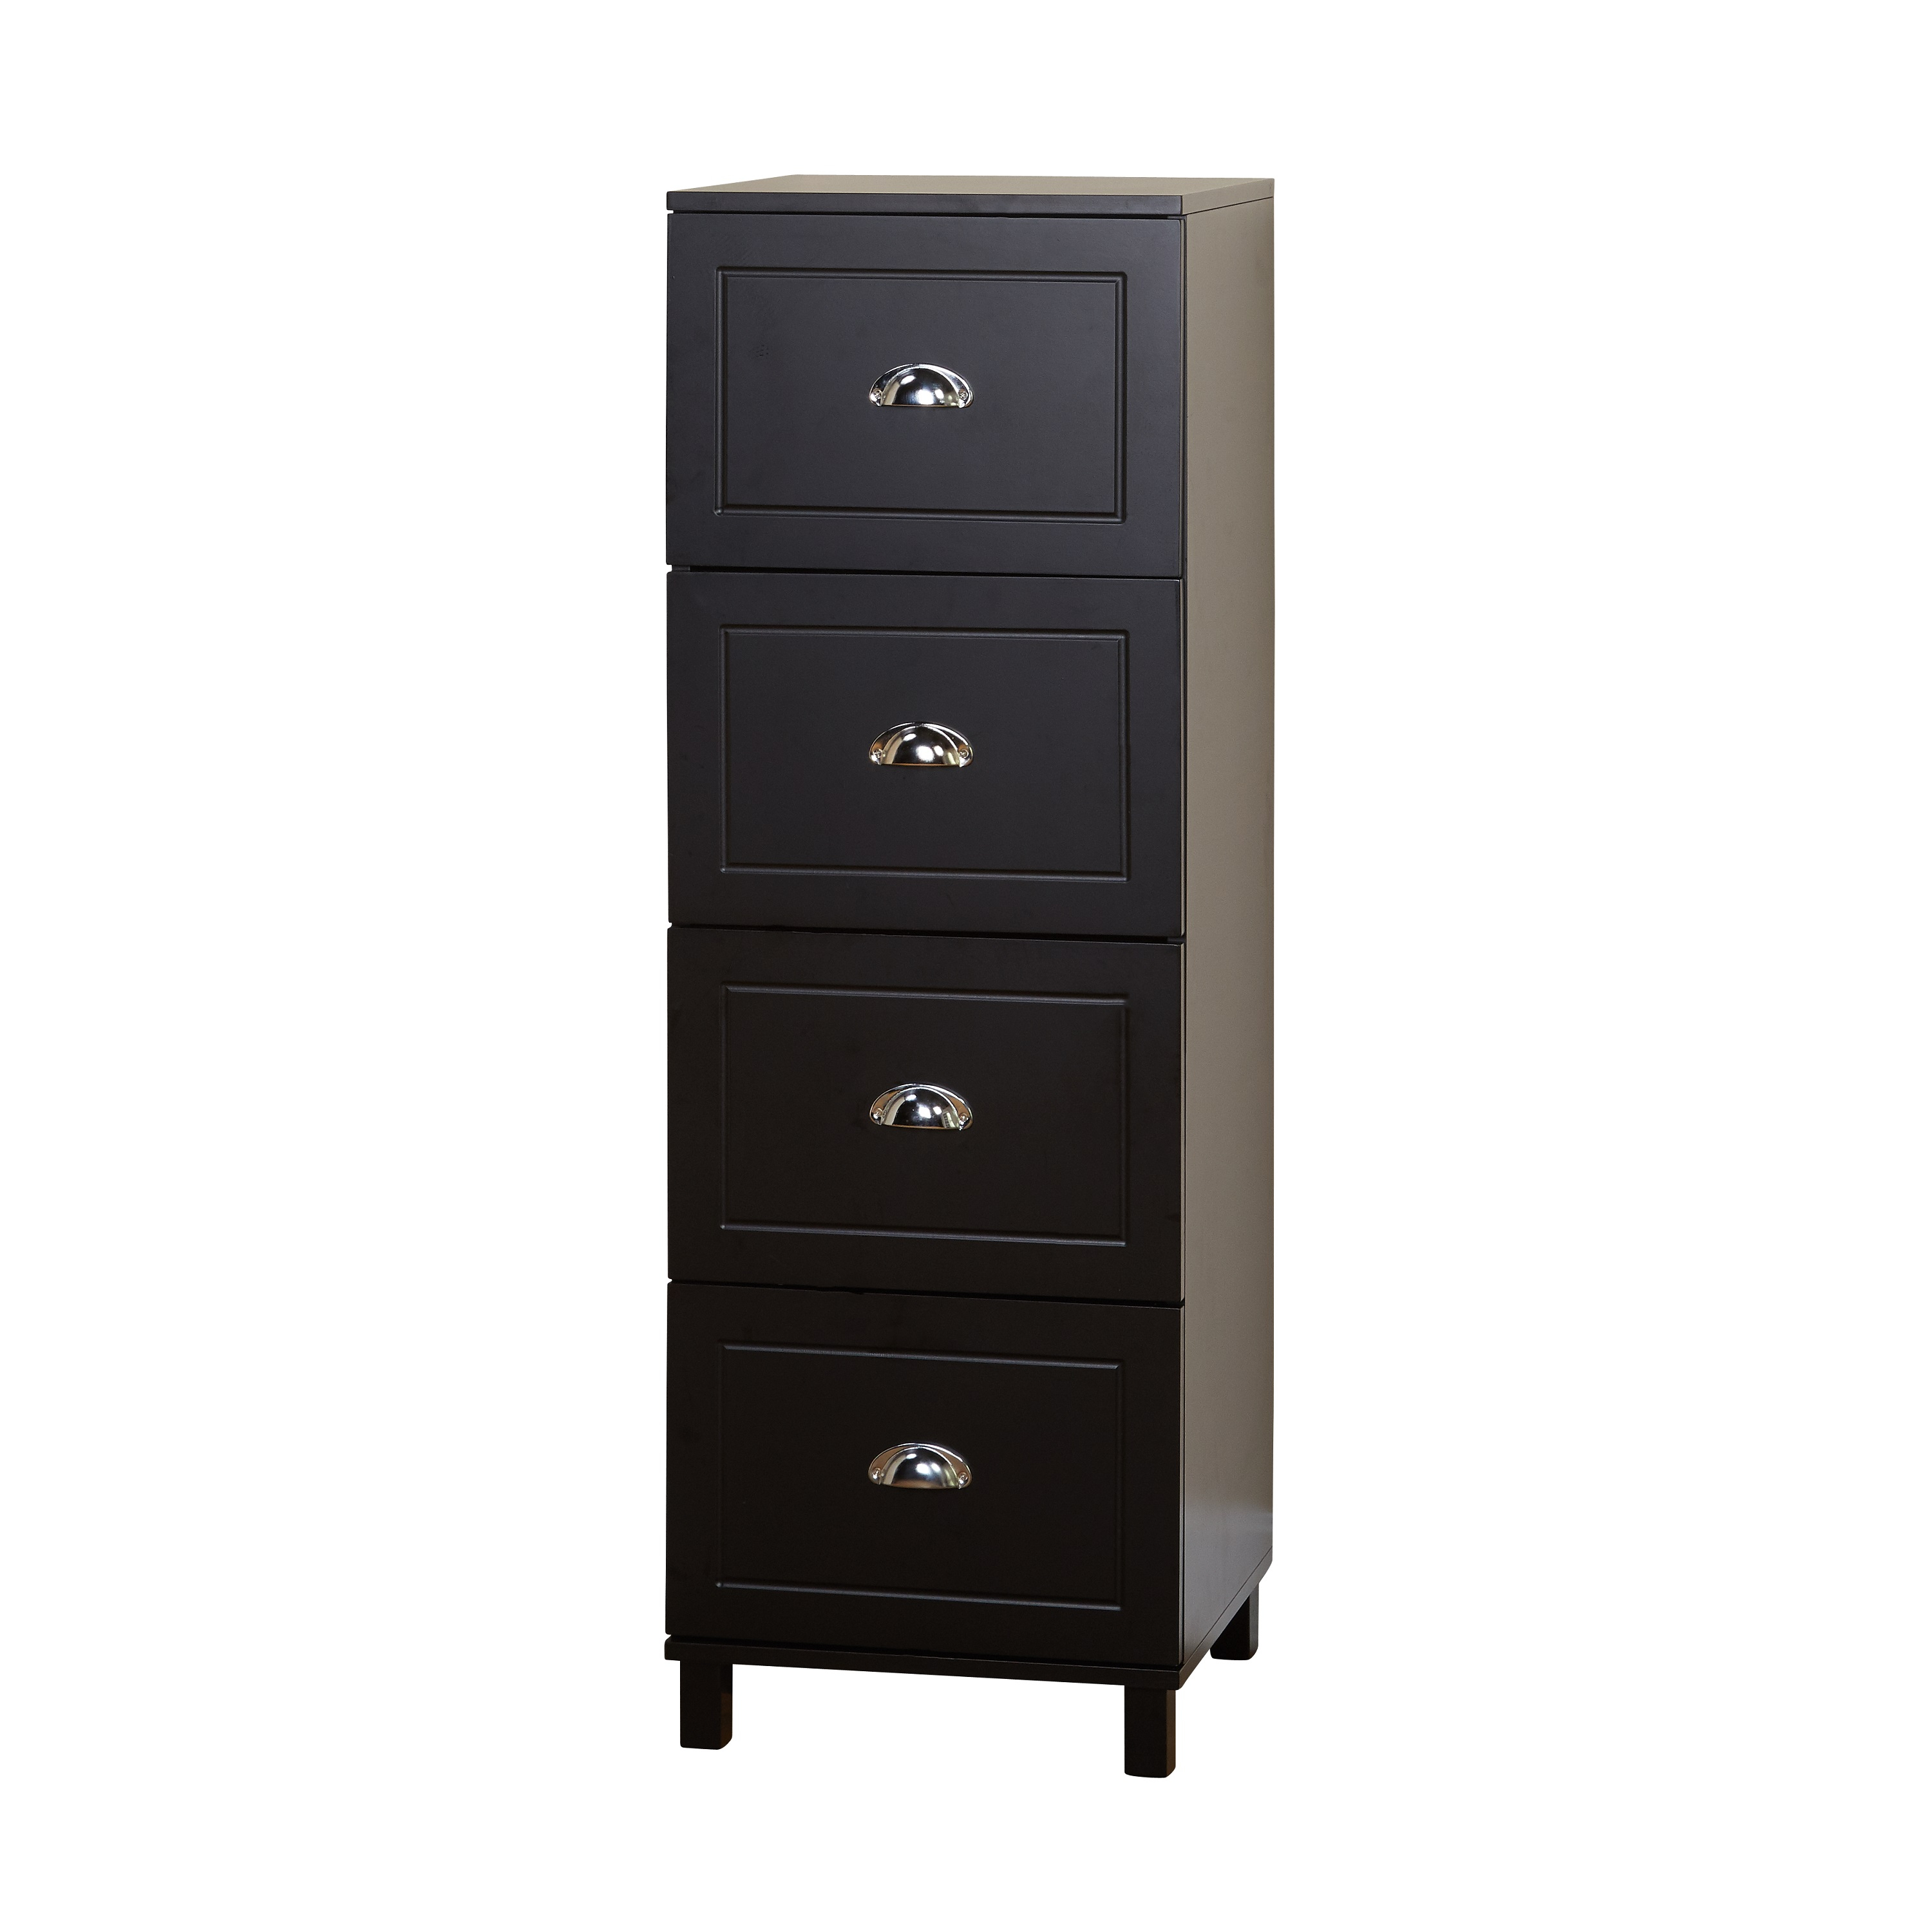 Bradley 4 Drawer Vertical Wood Filing Cabinet Black Walmart with proportions 3000 X 3000